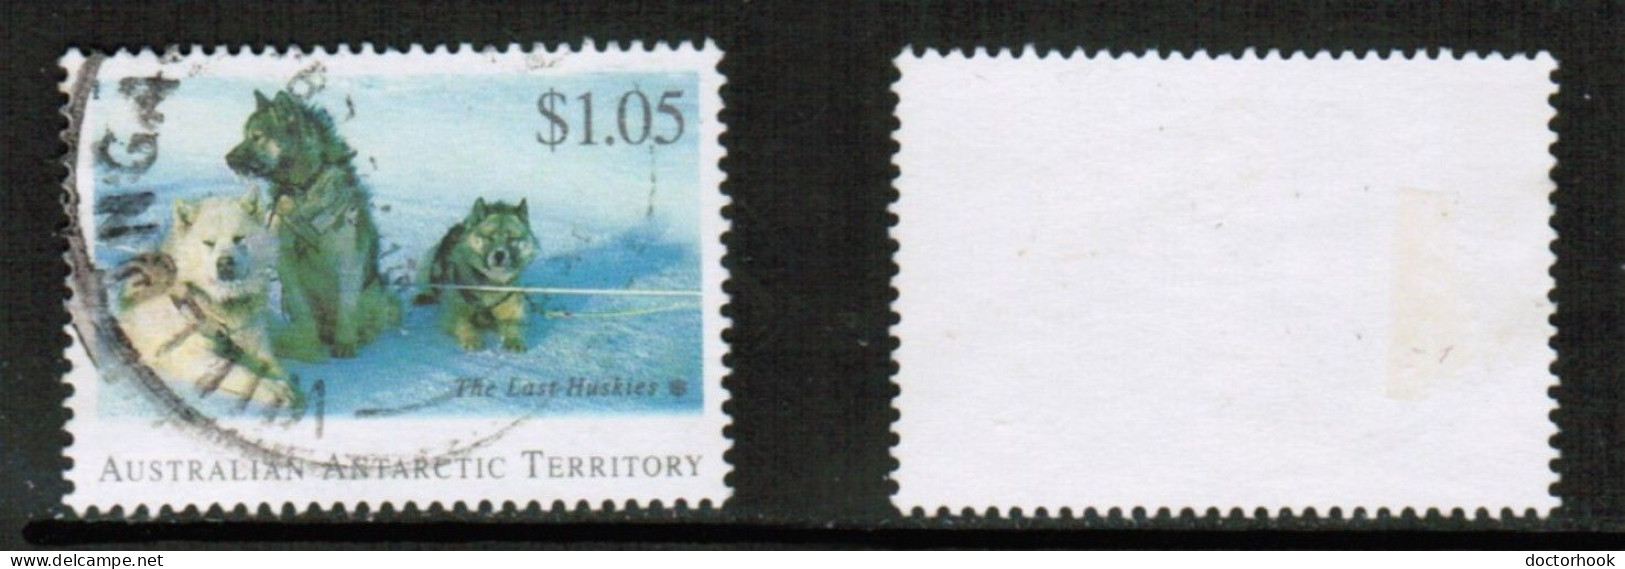 AUSTRALIAN ANTARCTIC TERRITORY   Scott # L 93 USED (CONDITION AS PER SCAN) (Stamp Scan # 929-3) - Oblitérés